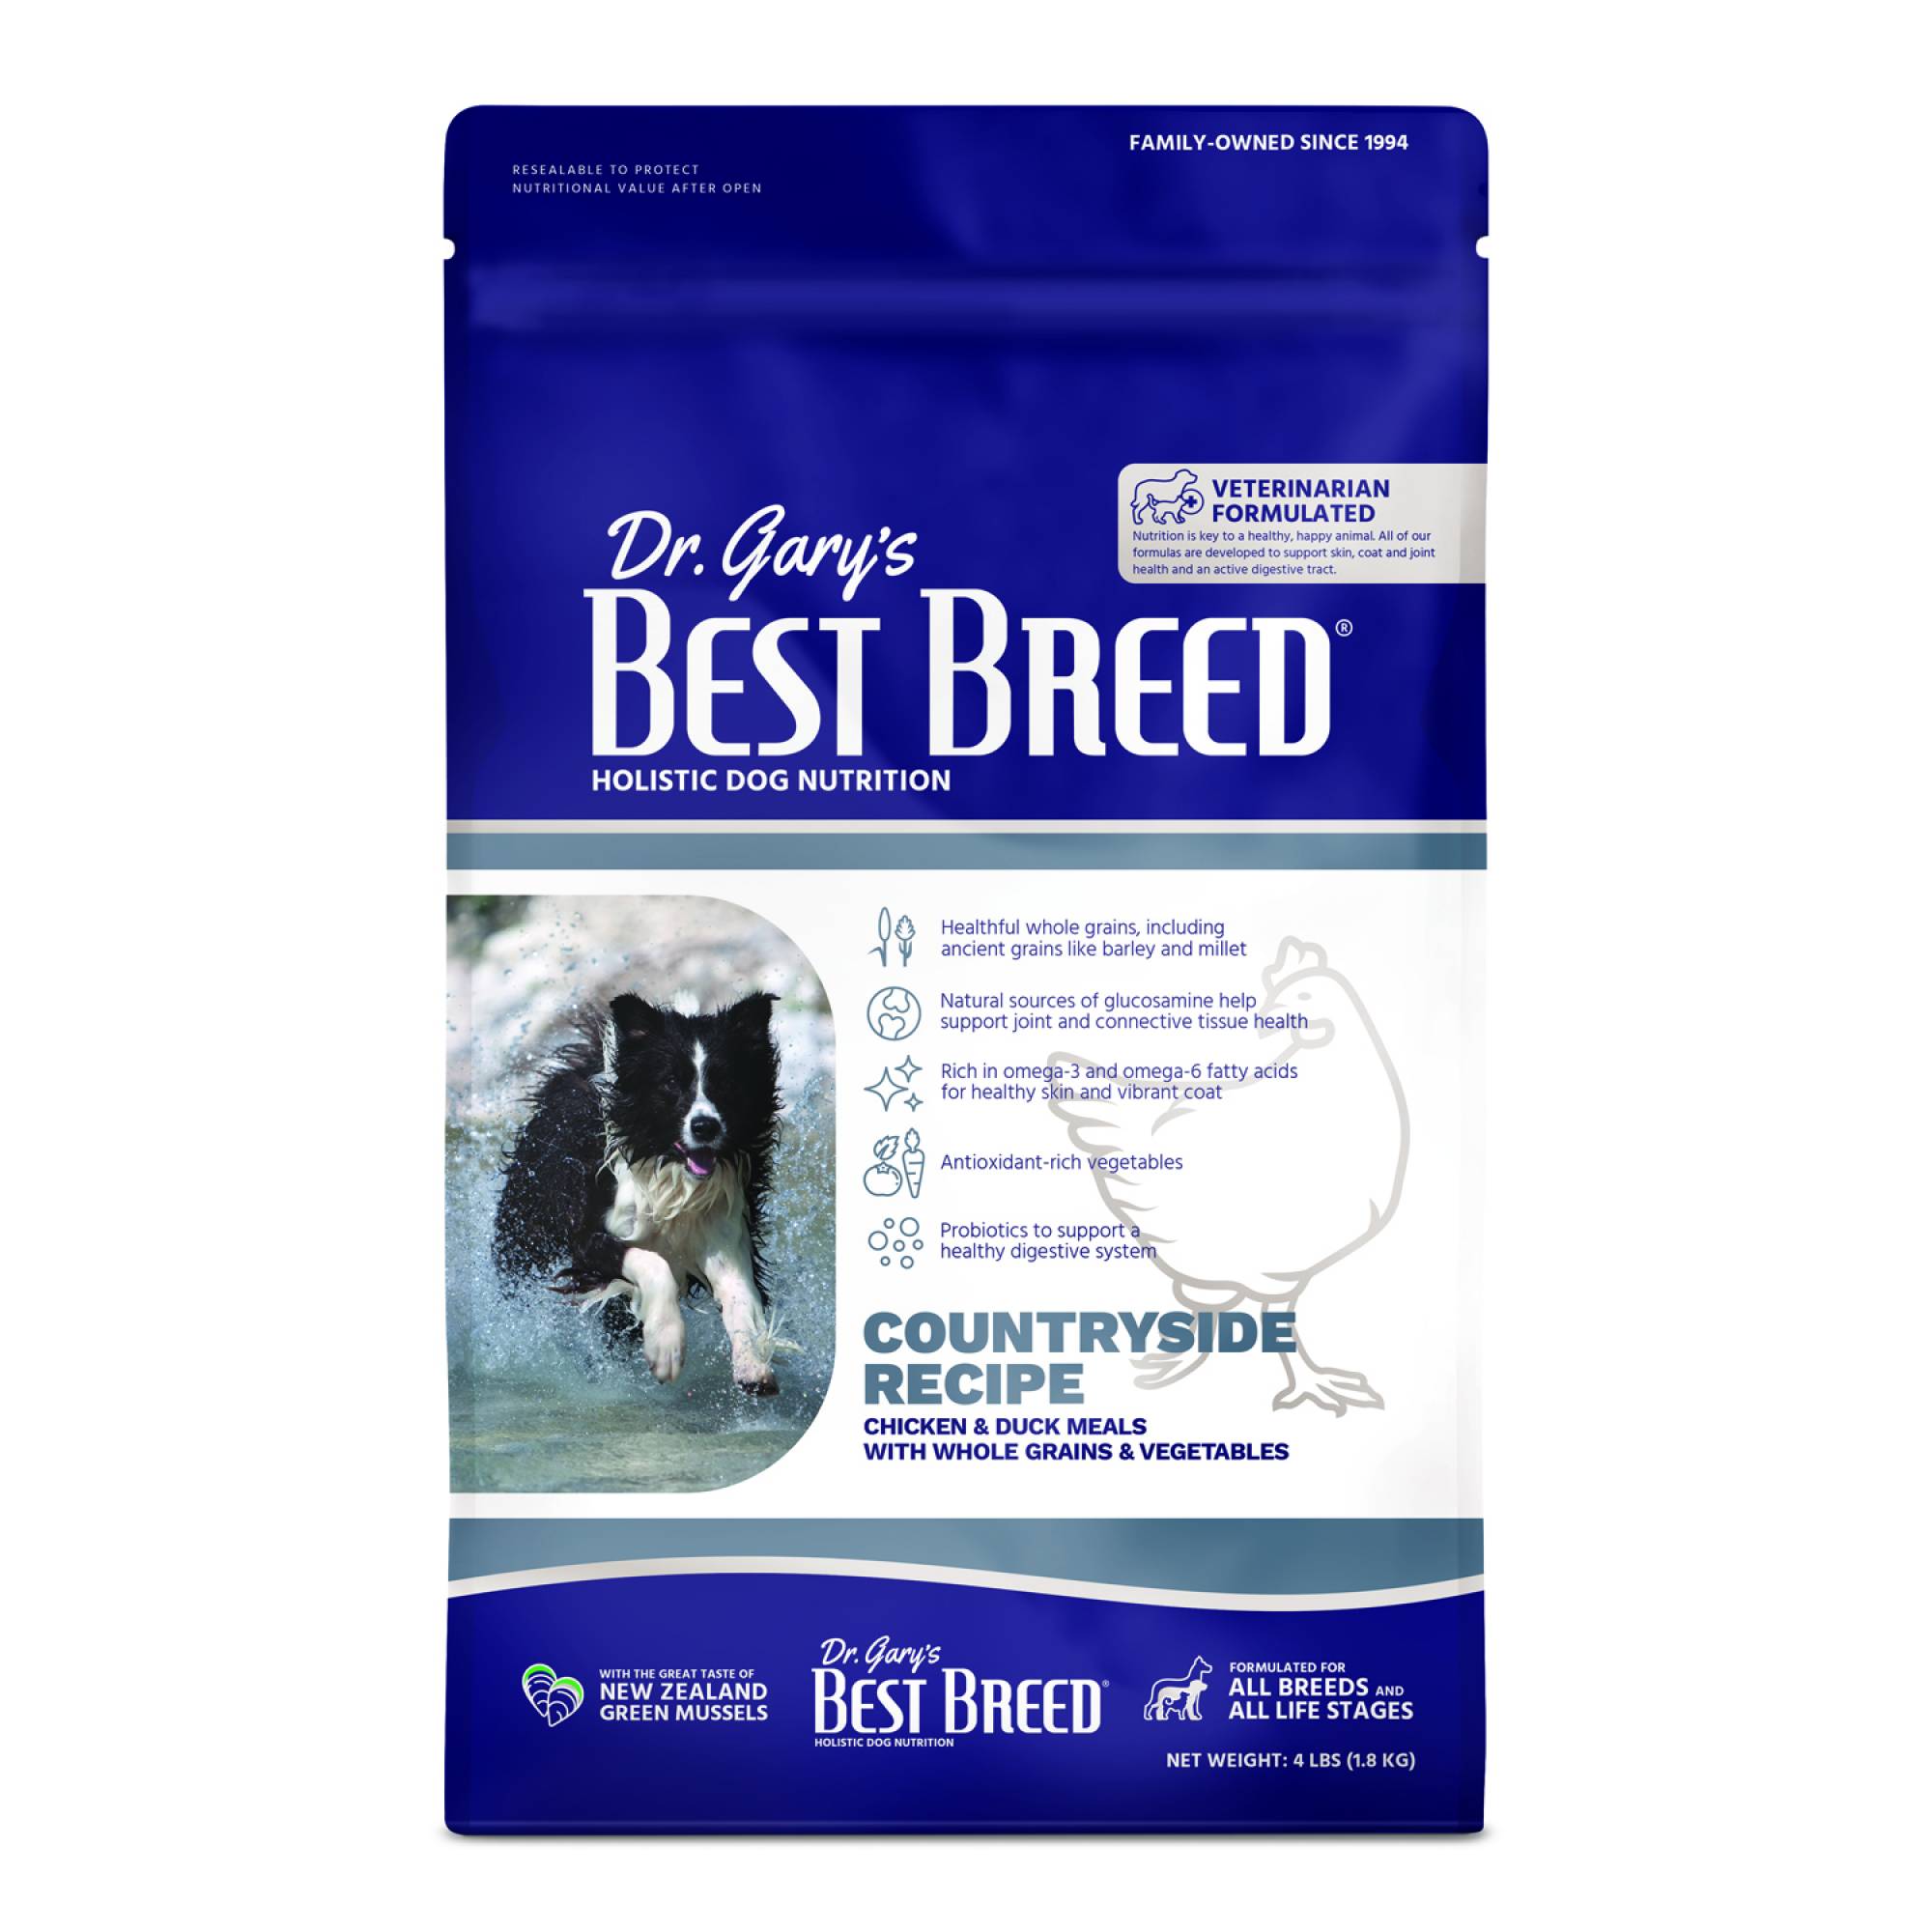 Best Breed - Adult Dog - Countryside Recipe (Chicken, Duck, Whole Grains & Veg) 4lbs